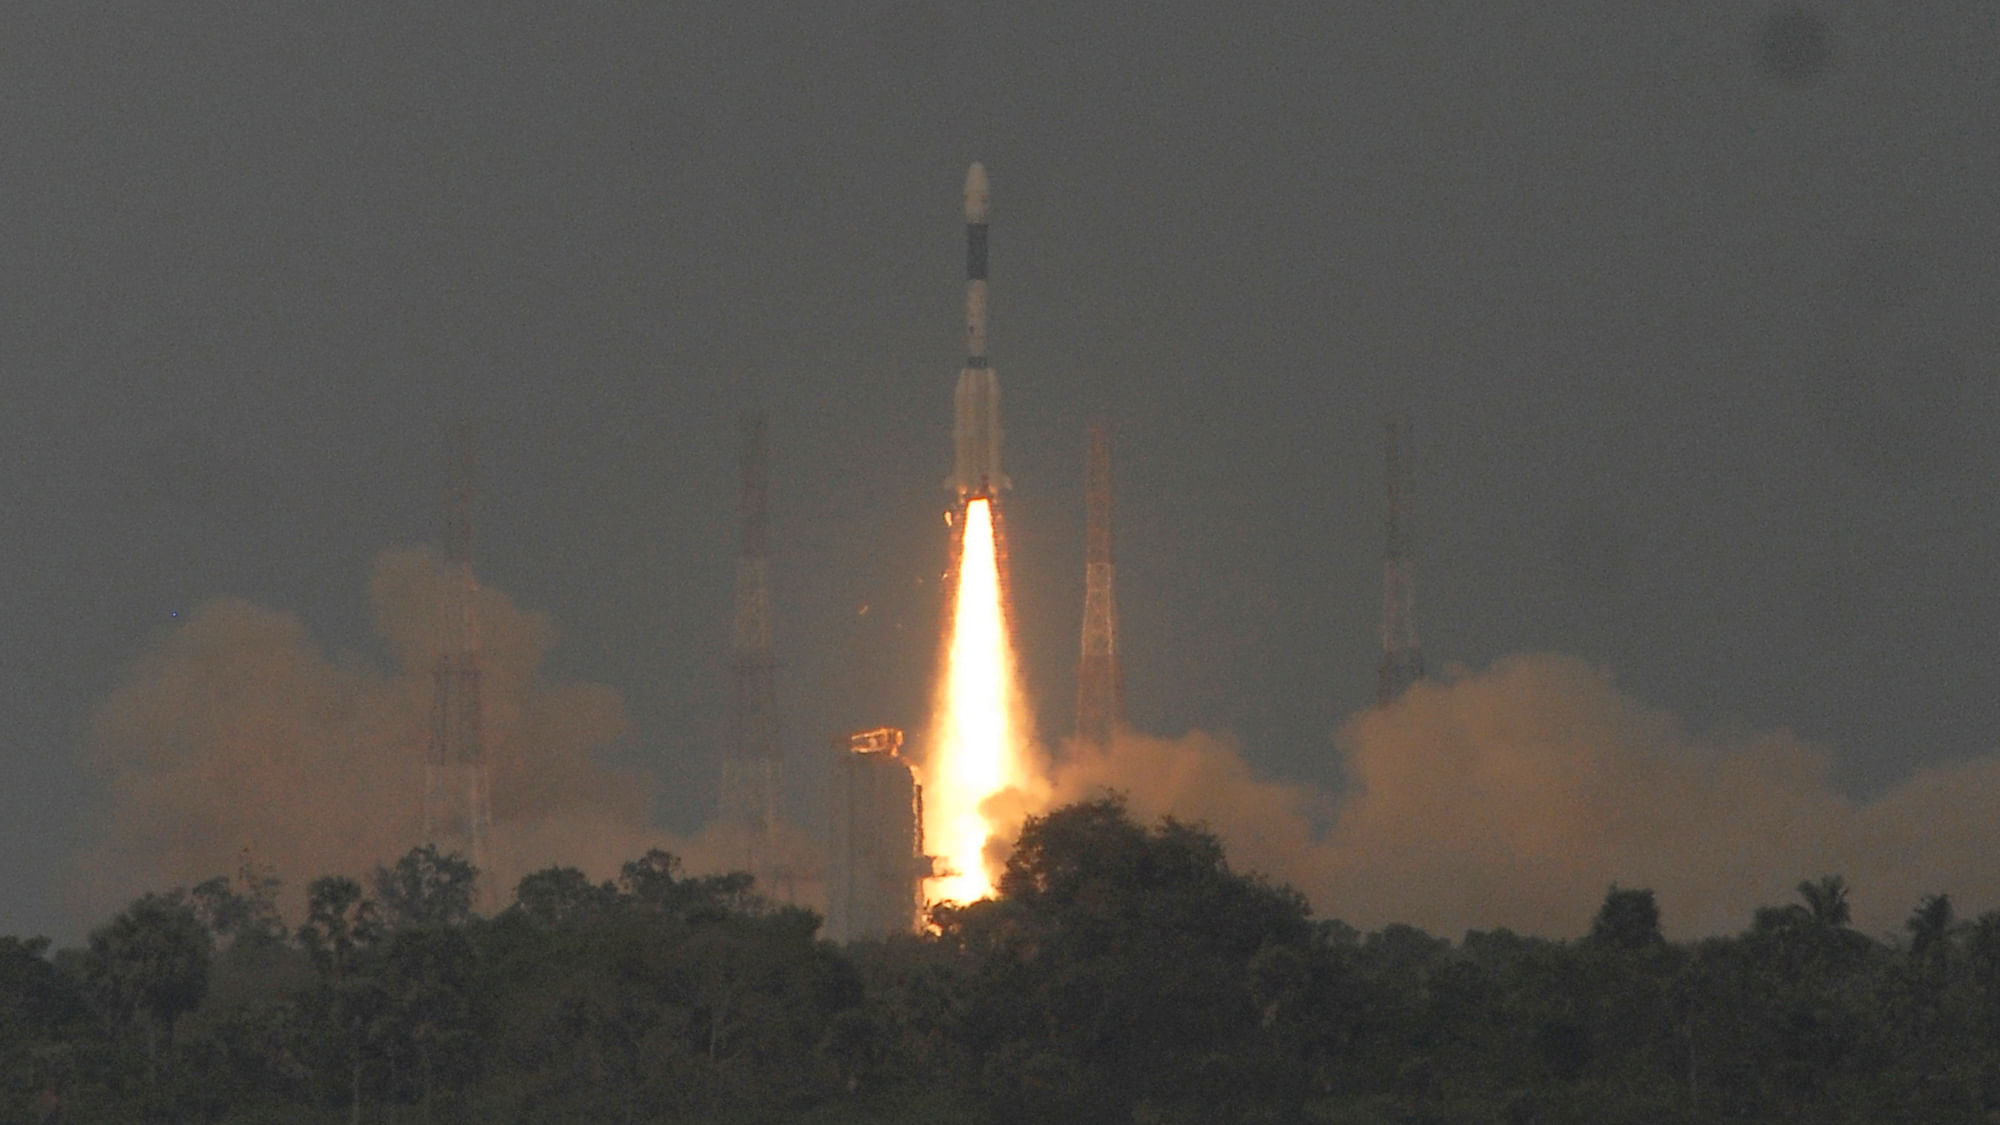 File image of Geosynchronous Satellite Launch Vehicle (GSLV-D3), blasting off carrying the communication satellite GSAT-4 from the Satish Dhawan space centre at Sriharikota in 2010. (Photo: Reuters)